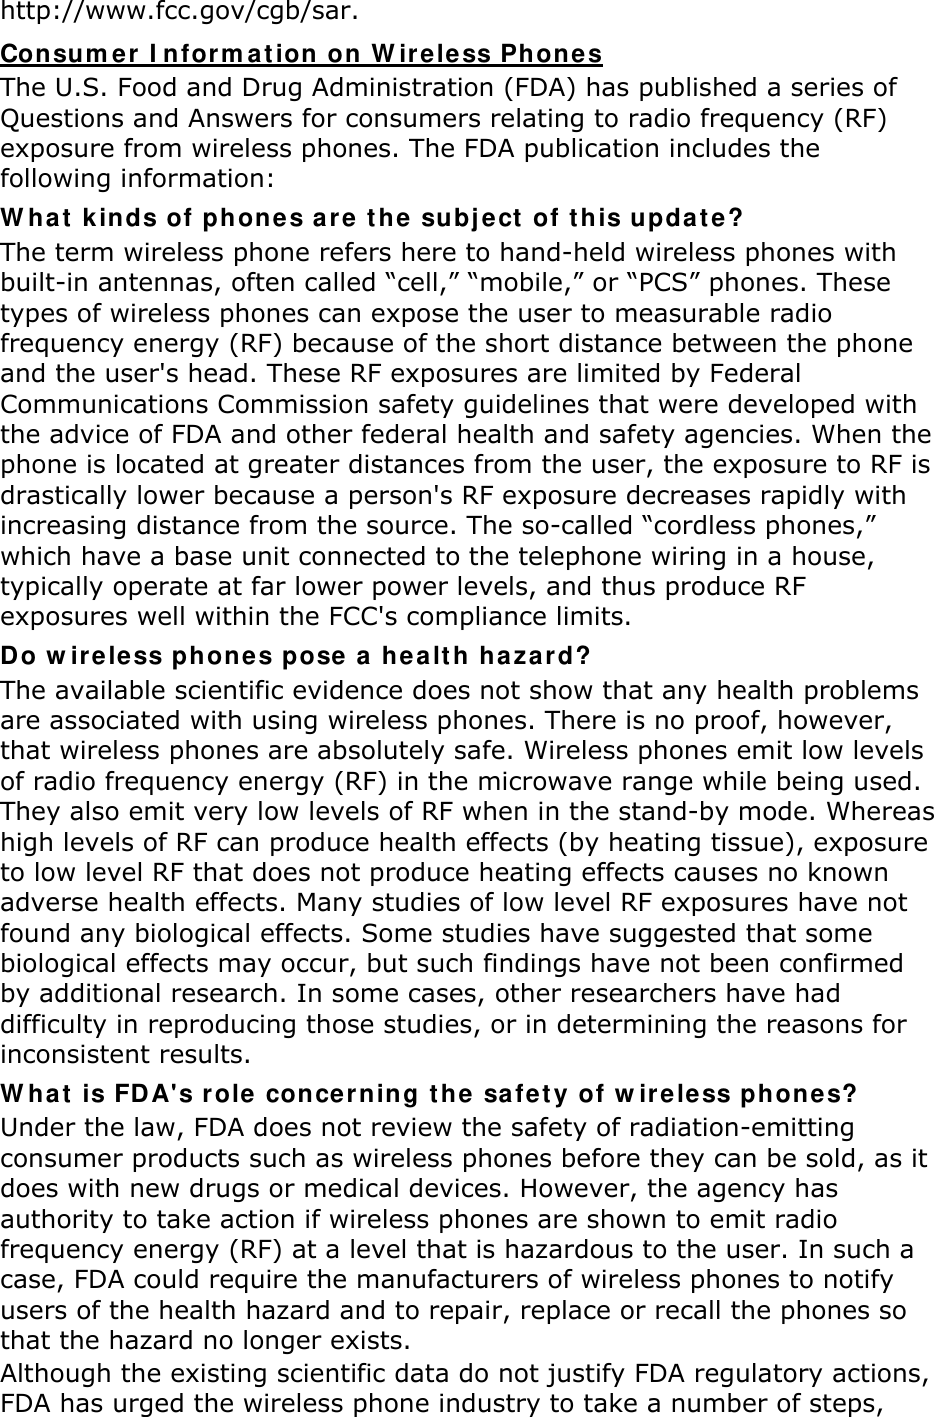 http://www.fcc.gov/cgb/sar. Consum er I nfor m a tion on W irele ss Phones The U.S. Food and Drug Administration (FDA) has published a series of Questions and Answers for consumers relating to radio frequency (RF) exposure from wireless phones. The FDA publication includes the following information: W hat kinds of phones a re the subj e ct  of this upda te? The term wireless phone refers here to hand-held wireless phones with built-in antennas, often called “cell,” “mobile,” or “PCS” phones. These types of wireless phones can expose the user to measurable radio frequency energy (RF) because of the short distance between the phone and the user&apos;s head. These RF exposures are limited by Federal Communications Commission safety guidelines that were developed with the advice of FDA and other federal health and safety agencies. When the phone is located at greater distances from the user, the exposure to RF is drastically lower because a person&apos;s RF exposure decreases rapidly with increasing distance from the source. The so-called “cordless phones,” which have a base unit connected to the telephone wiring in a house, typically operate at far lower power levels, and thus produce RF exposures well within the FCC&apos;s compliance limits. Do w ir eless phones pose a h ea lt h haza rd? The available scientific evidence does not show that any health problems are associated with using wireless phones. There is no proof, however, that wireless phones are absolutely safe. Wireless phones emit low levels of radio frequency energy (RF) in the microwave range while being used. They also emit very low levels of RF when in the stand-by mode. Whereas high levels of RF can produce health effects (by heating tissue), exposure to low level RF that does not produce heating effects causes no known adverse health effects. Many studies of low level RF exposures have not found any biological effects. Some studies have suggested that some biological effects may occur, but such findings have not been confirmed by additional research. In some cases, other researchers have had difficulty in reproducing those studies, or in determining the reasons for inconsistent results. W hat is FDA&apos;s role  conce rning the sa fet y of w ir eless phones? Under the law, FDA does not review the safety of radiation-emitting consumer products such as wireless phones before they can be sold, as it does with new drugs or medical devices. However, the agency has authority to take action if wireless phones are shown to emit radio frequency energy (RF) at a level that is hazardous to the user. In such a case, FDA could require the manufacturers of wireless phones to notify users of the health hazard and to repair, replace or recall the phones so that the hazard no longer exists. Although the existing scientific data do not justify FDA regulatory actions, FDA has urged the wireless phone industry to take a number of steps, 